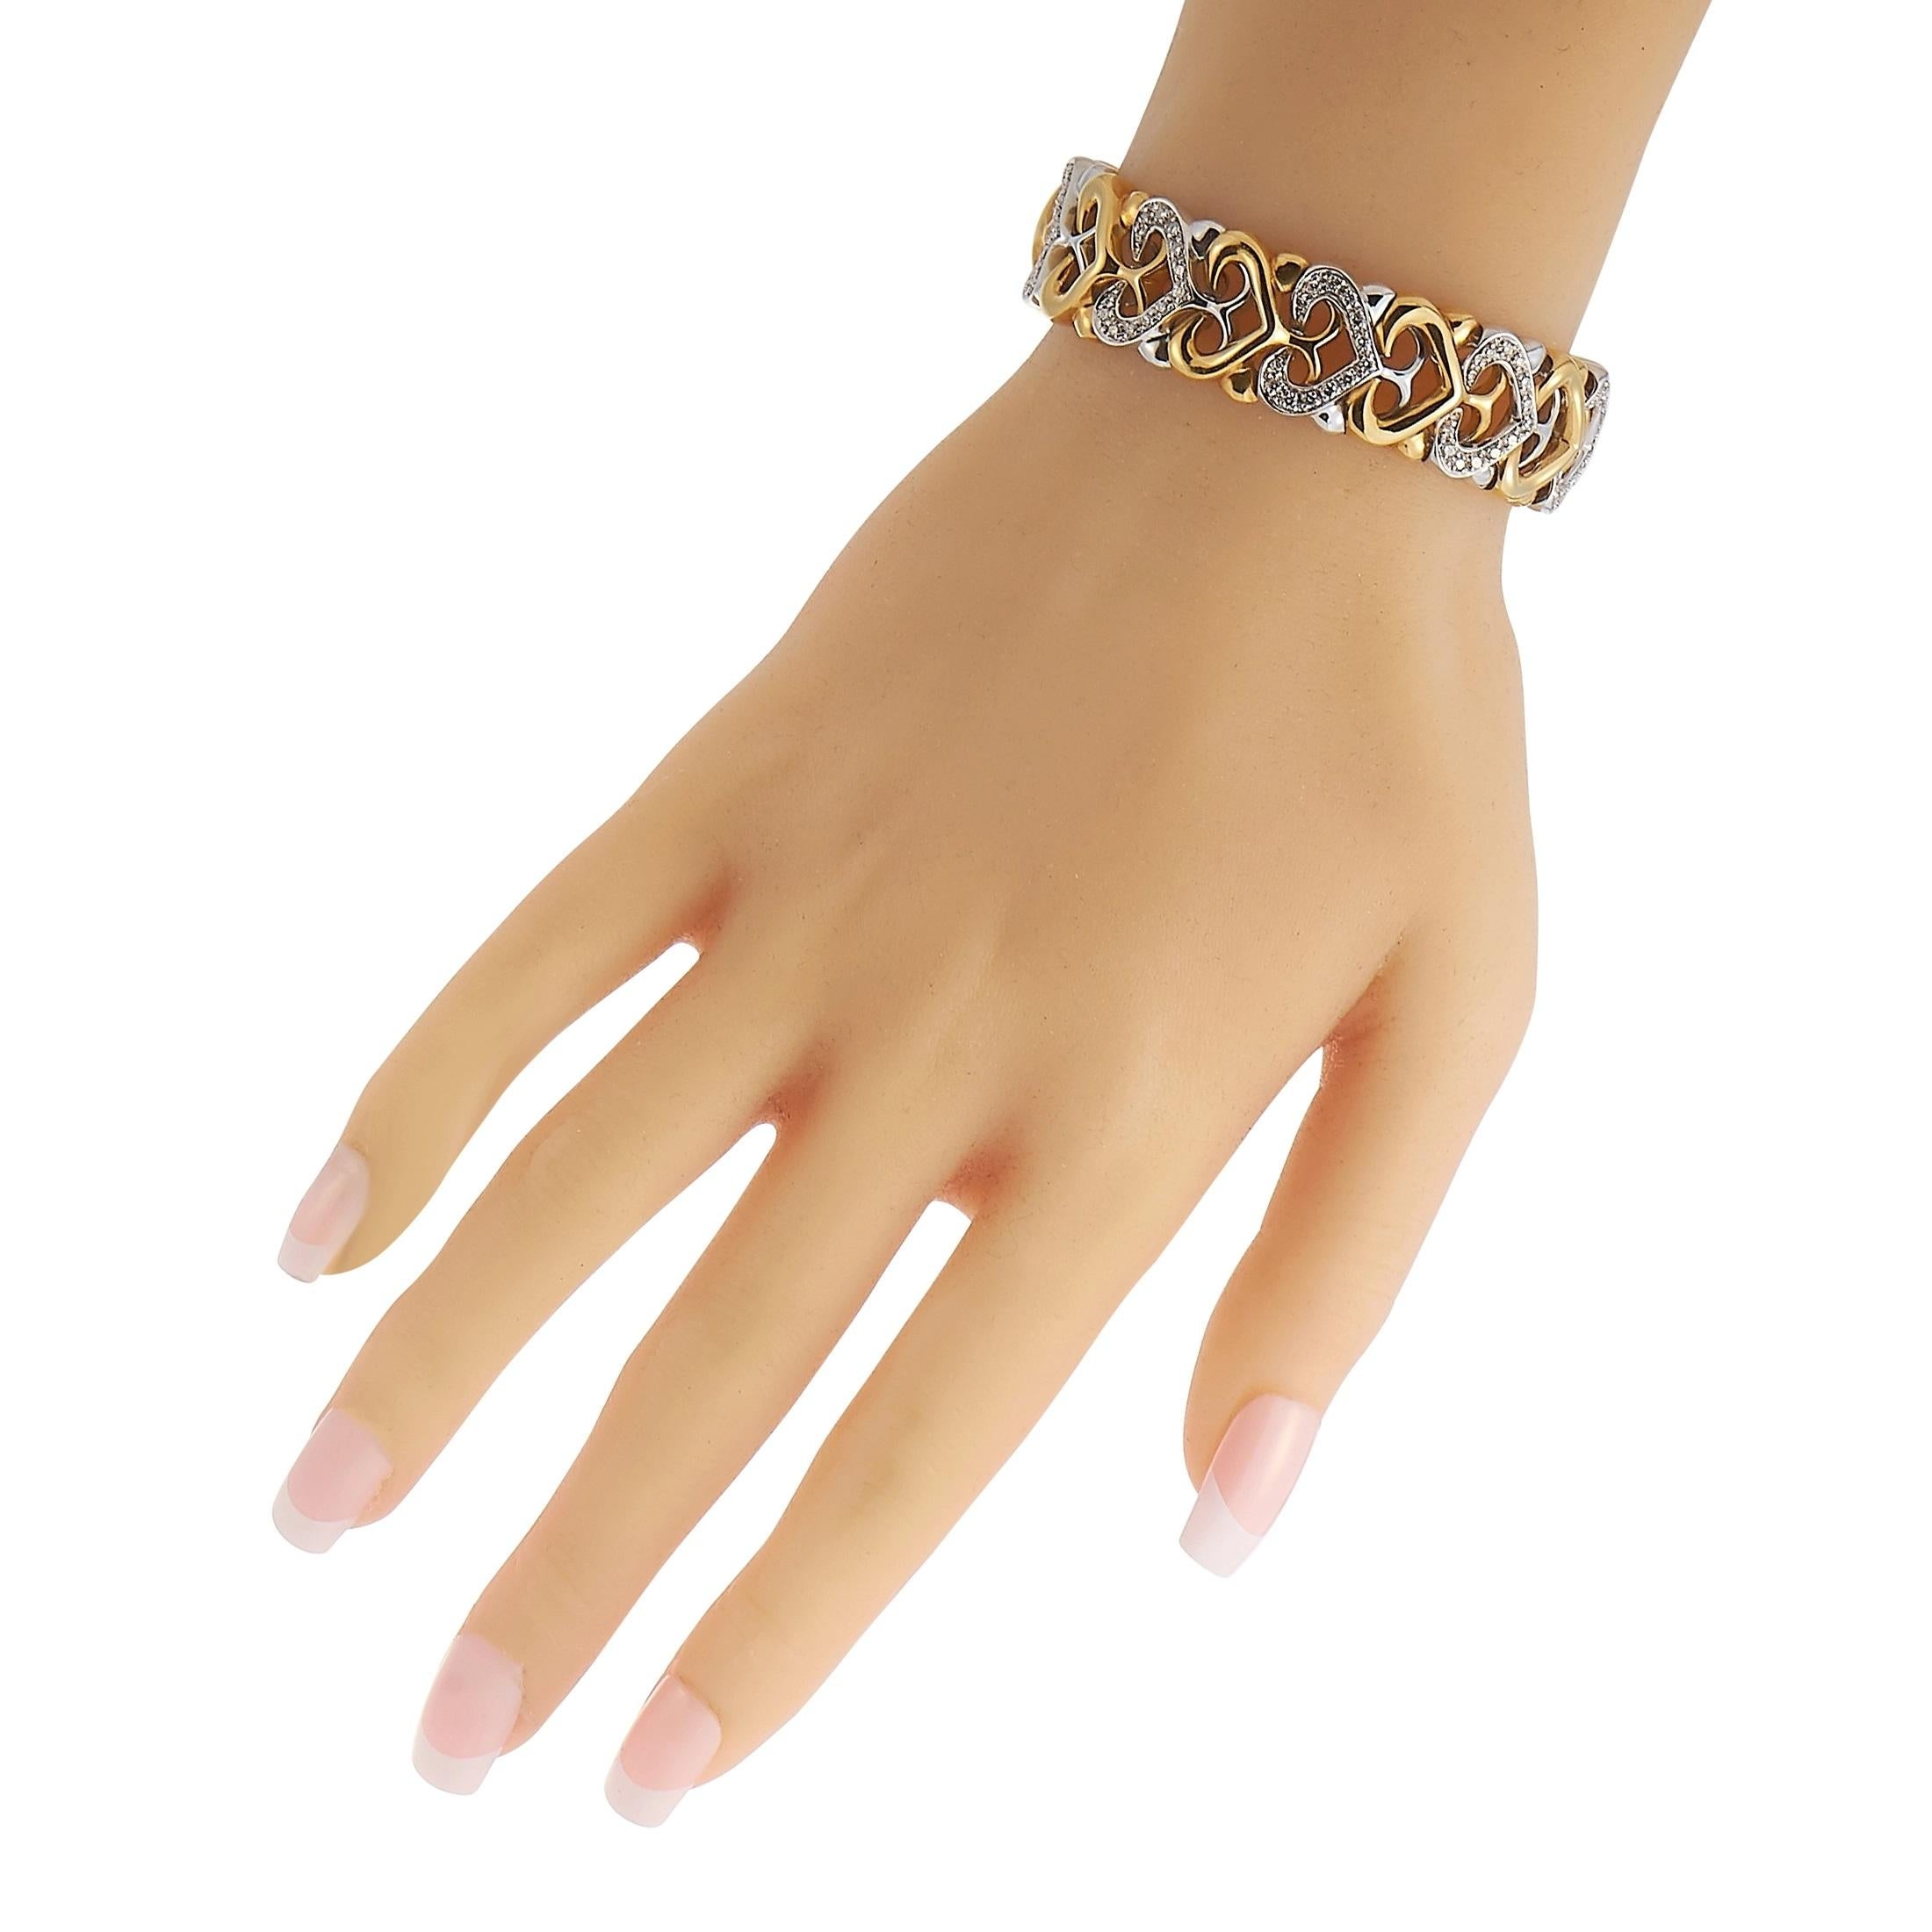 Elegant hearts crafted from 18K Yellow Gold and 18K White Gold make this Bvlgari bracelet a scintillating piece of jewelry that is inherently romantic. Covered in 1.0 carats of diamonds, this structured style measures 7” long and includes secure box